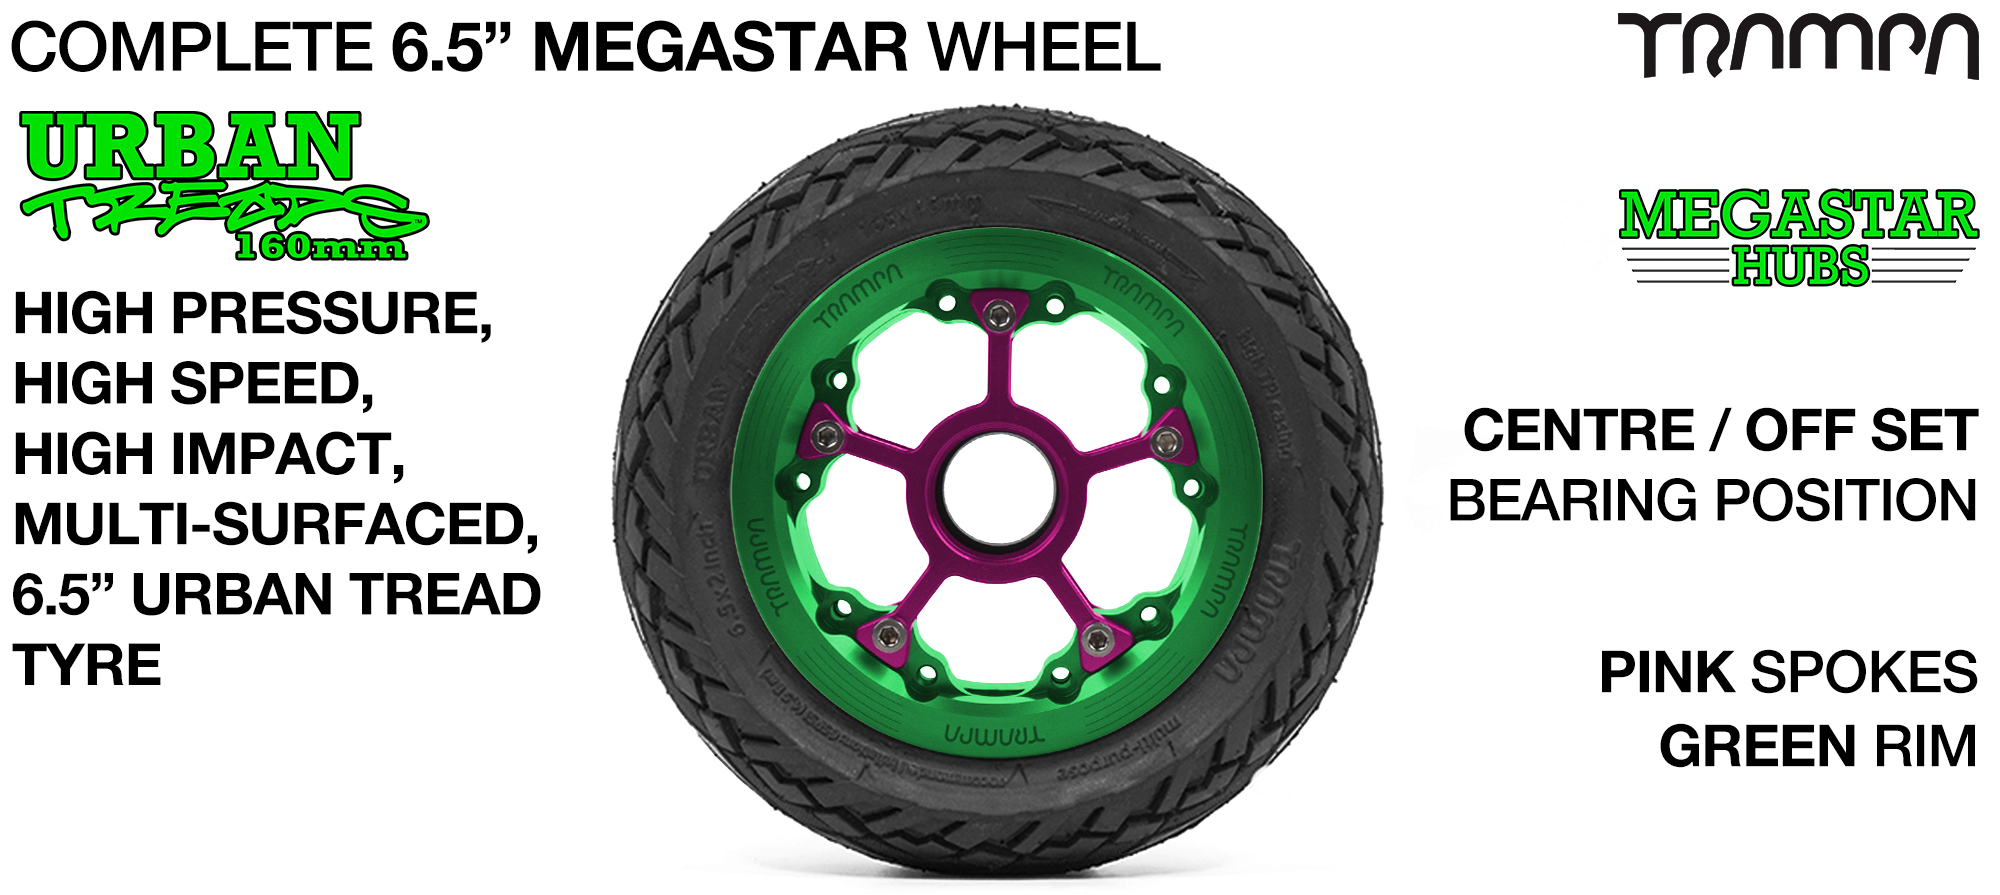 CENTER-SET MEGASTAR 8 Hub with the amazing Low Profile 6.5 Inch URBAN Treads Tyres 